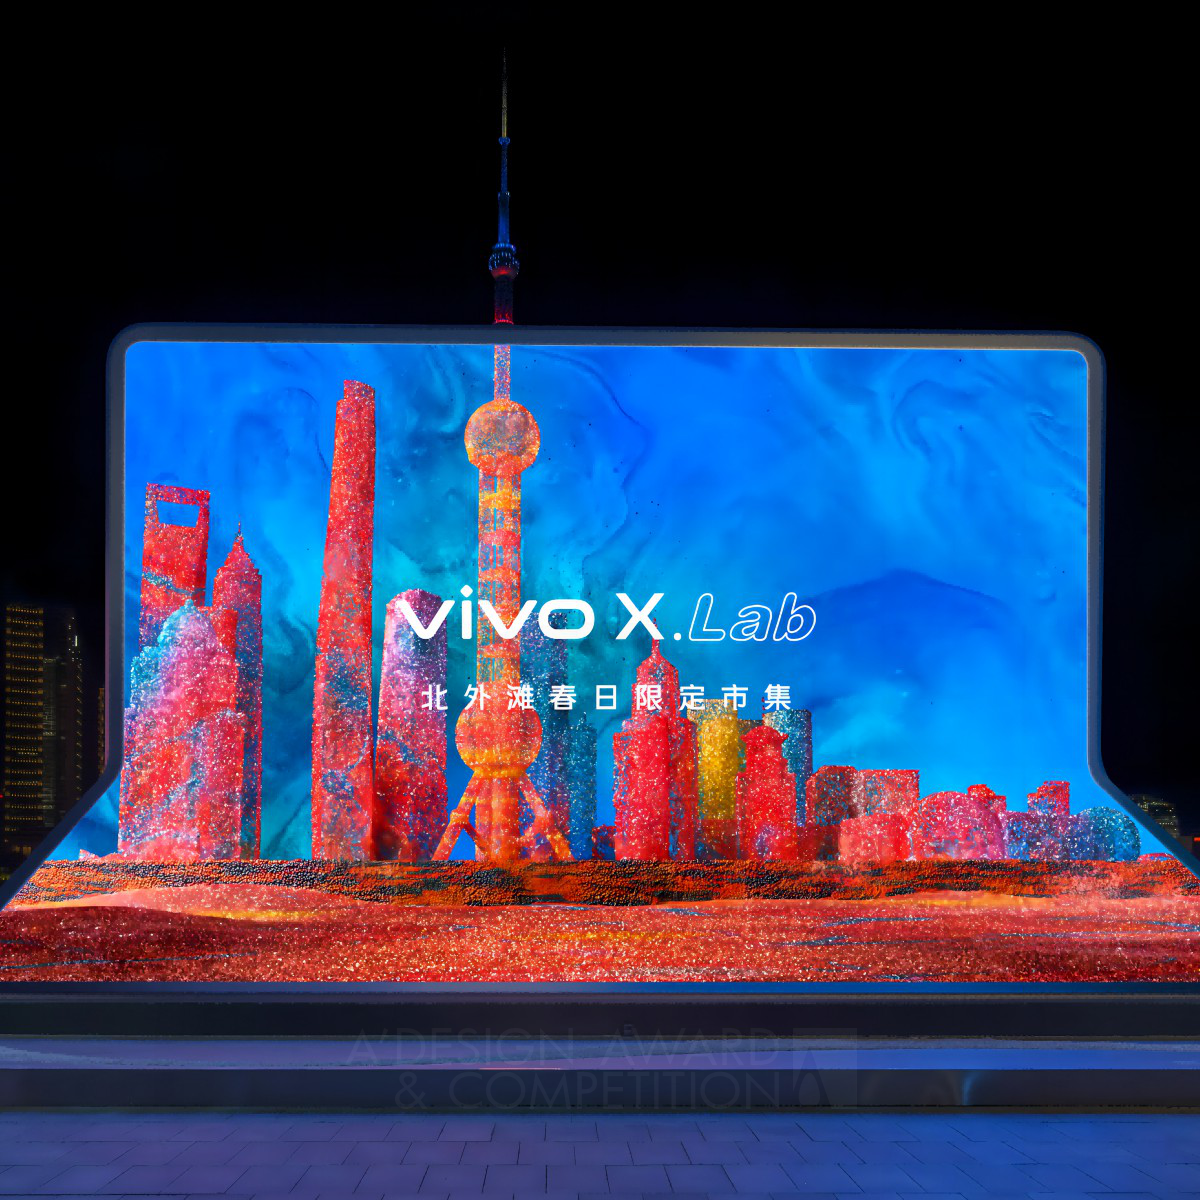 Vivo X Series Outdoor Campaign by Output Silver Advertising, Marketing and Communication Design Award Winner 2024 